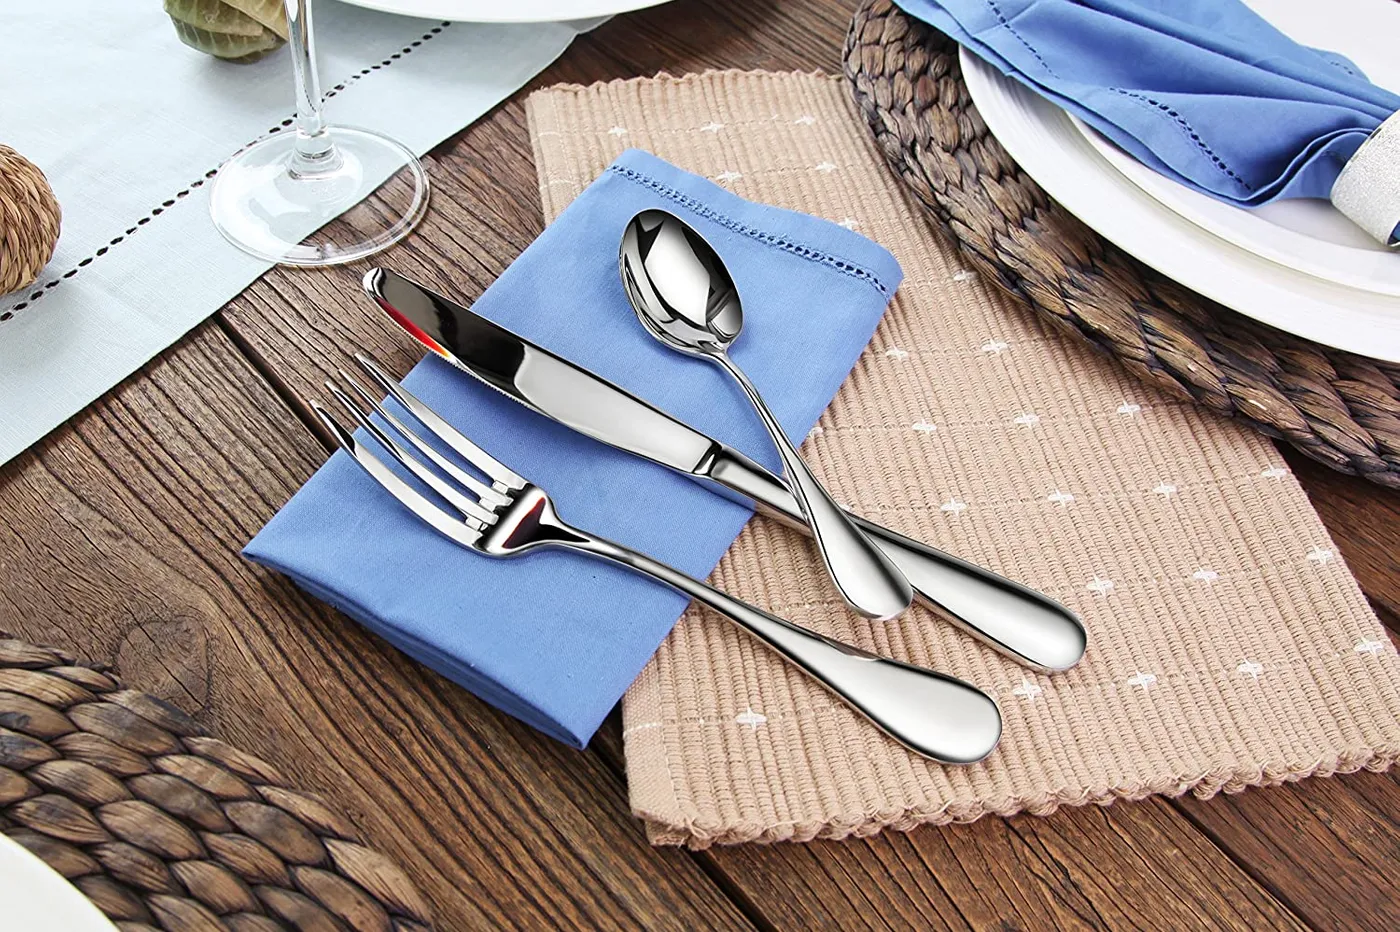 use equipment rental software to rent out silverware on a website